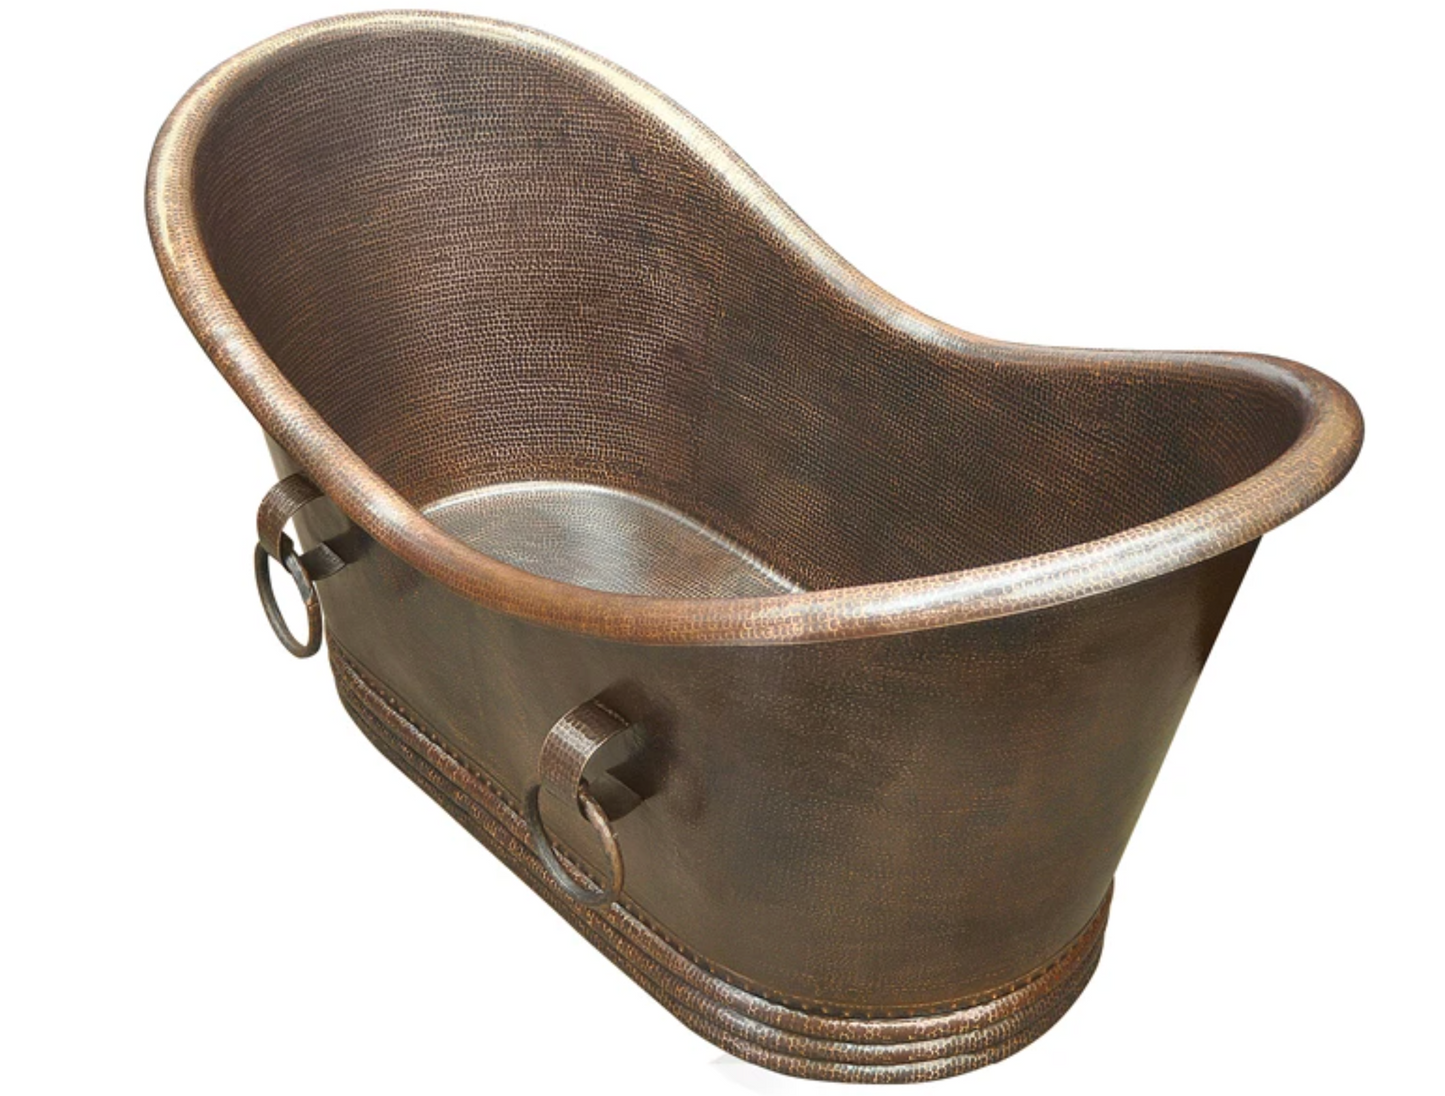 Double Slipper Hammered Copper Bathtub with Rings